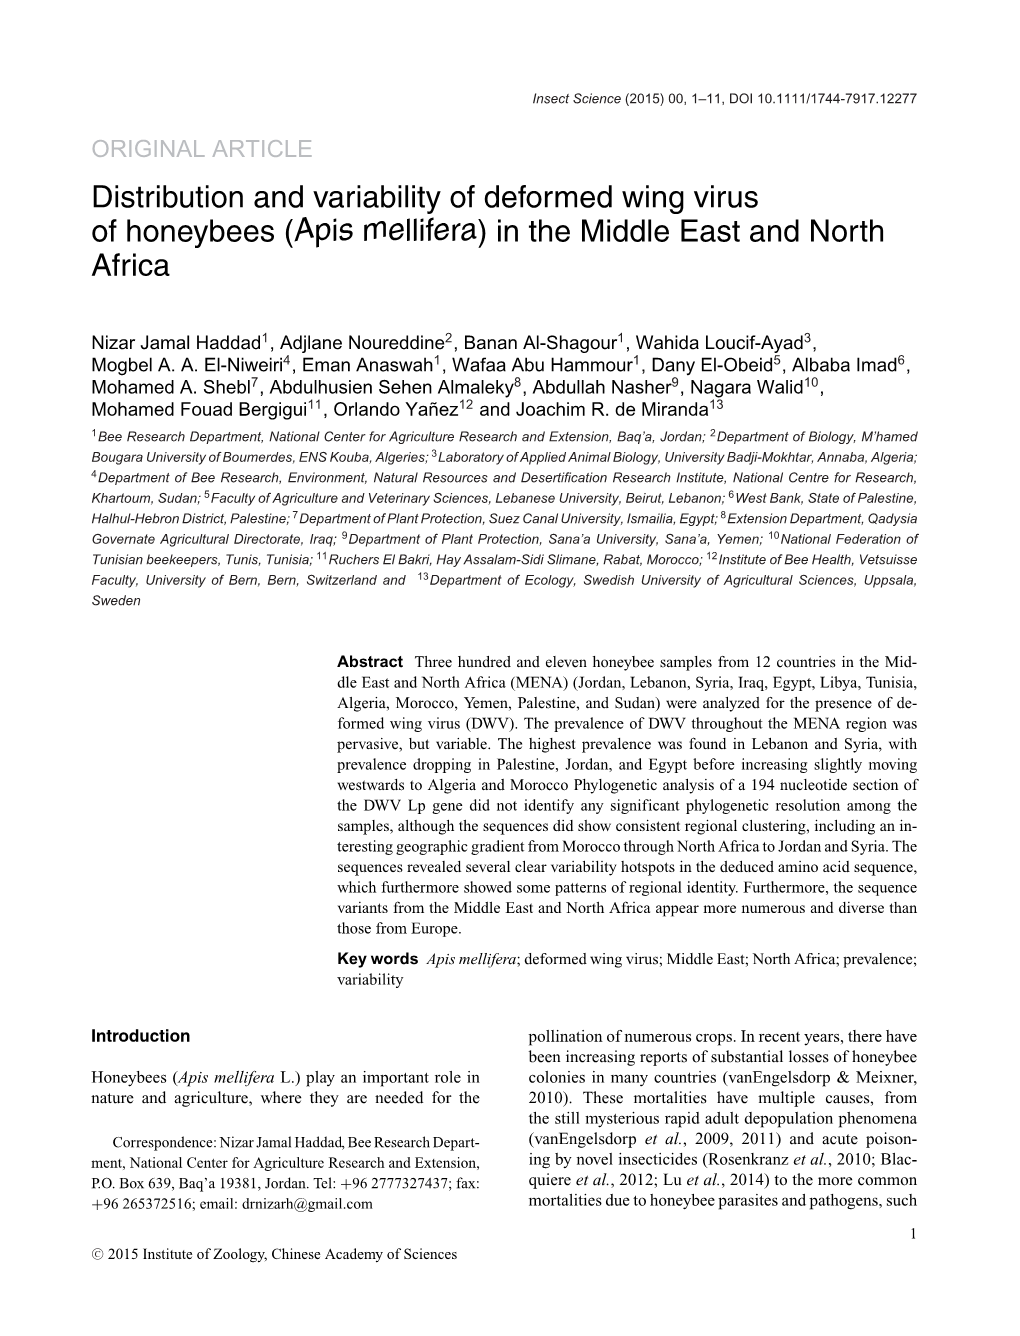 Distribution and Variability of Deformed Wing Virus of Honeybees (Apis Mellifera) in the Middle East and North Africa